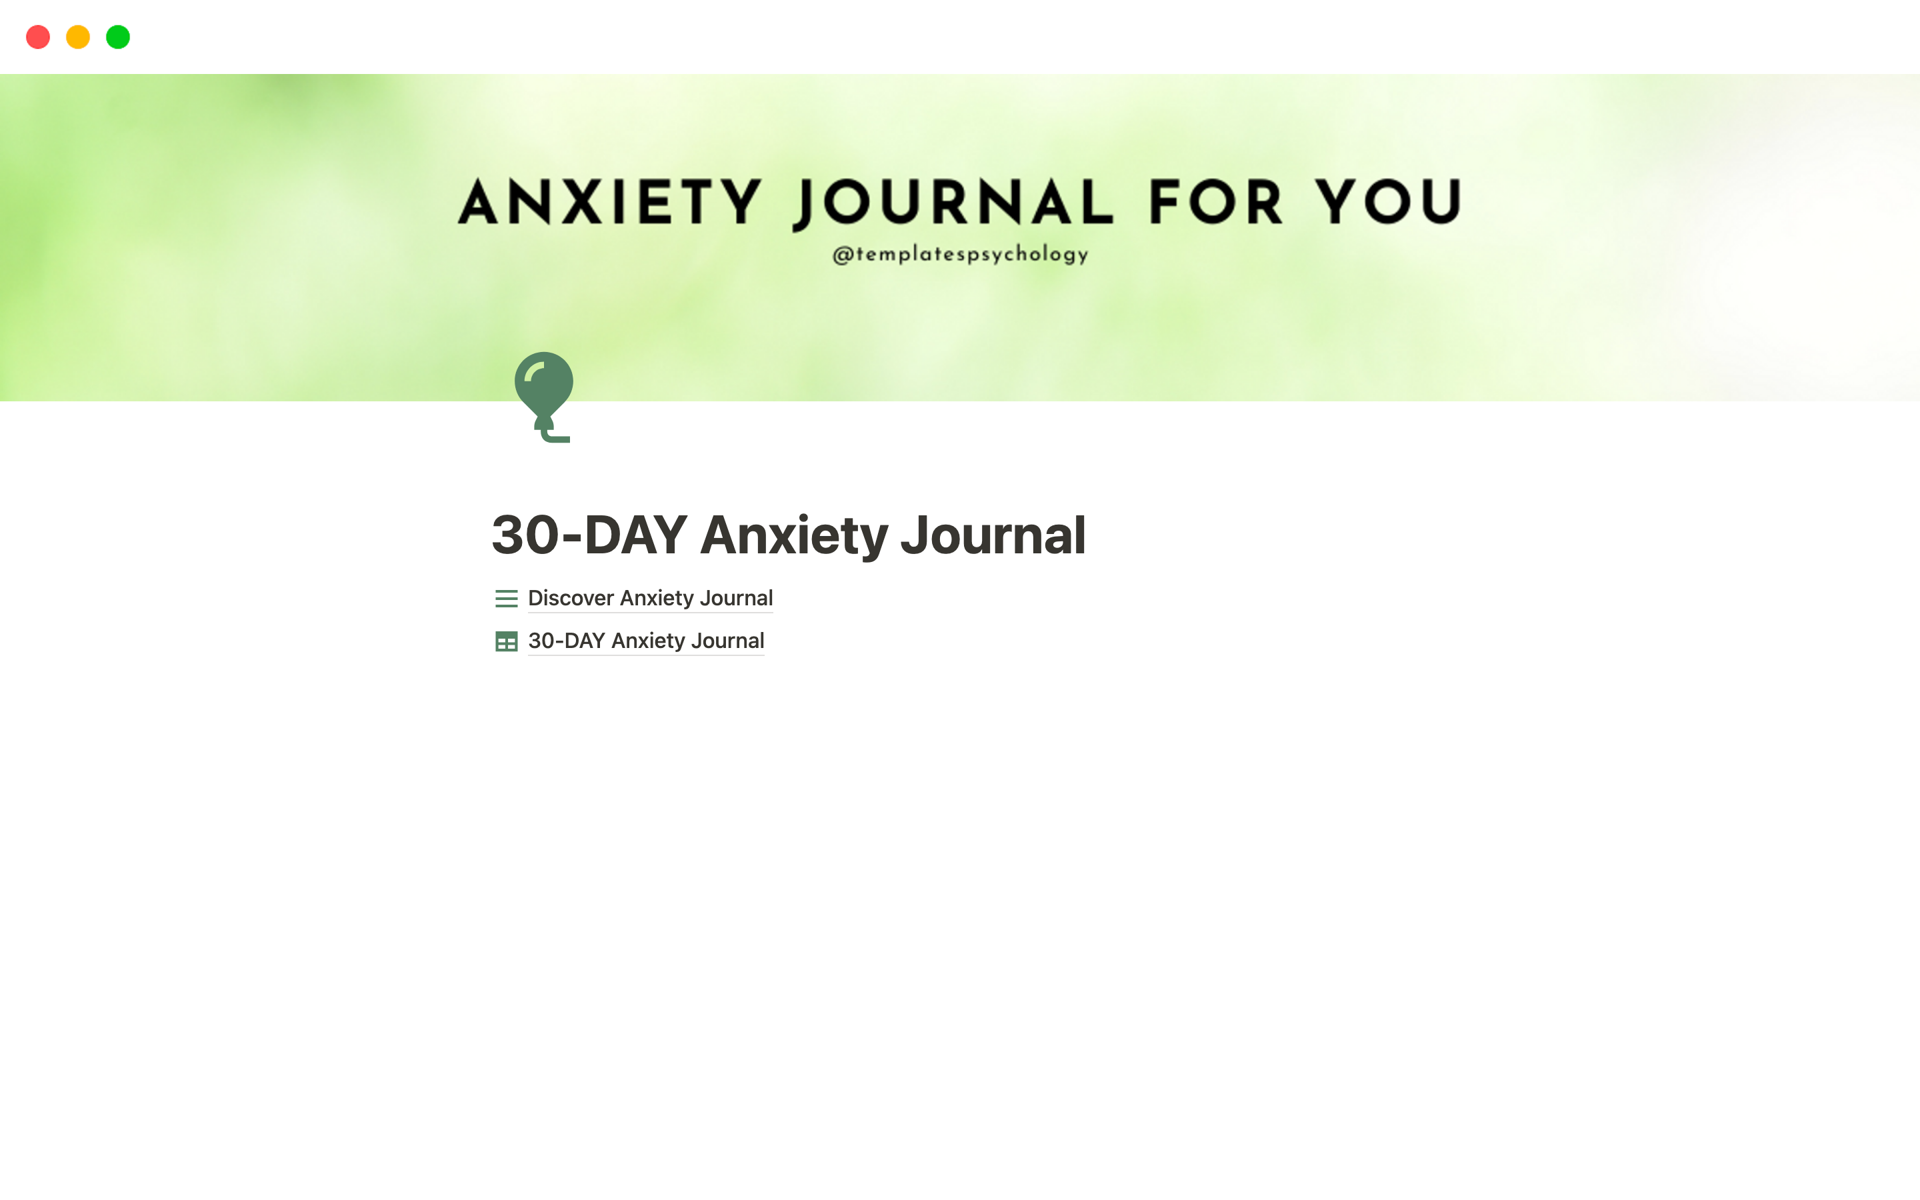 It is for people with anxiety to face it by taking notes for 30-day or more, and to discover their coping mechanisms.